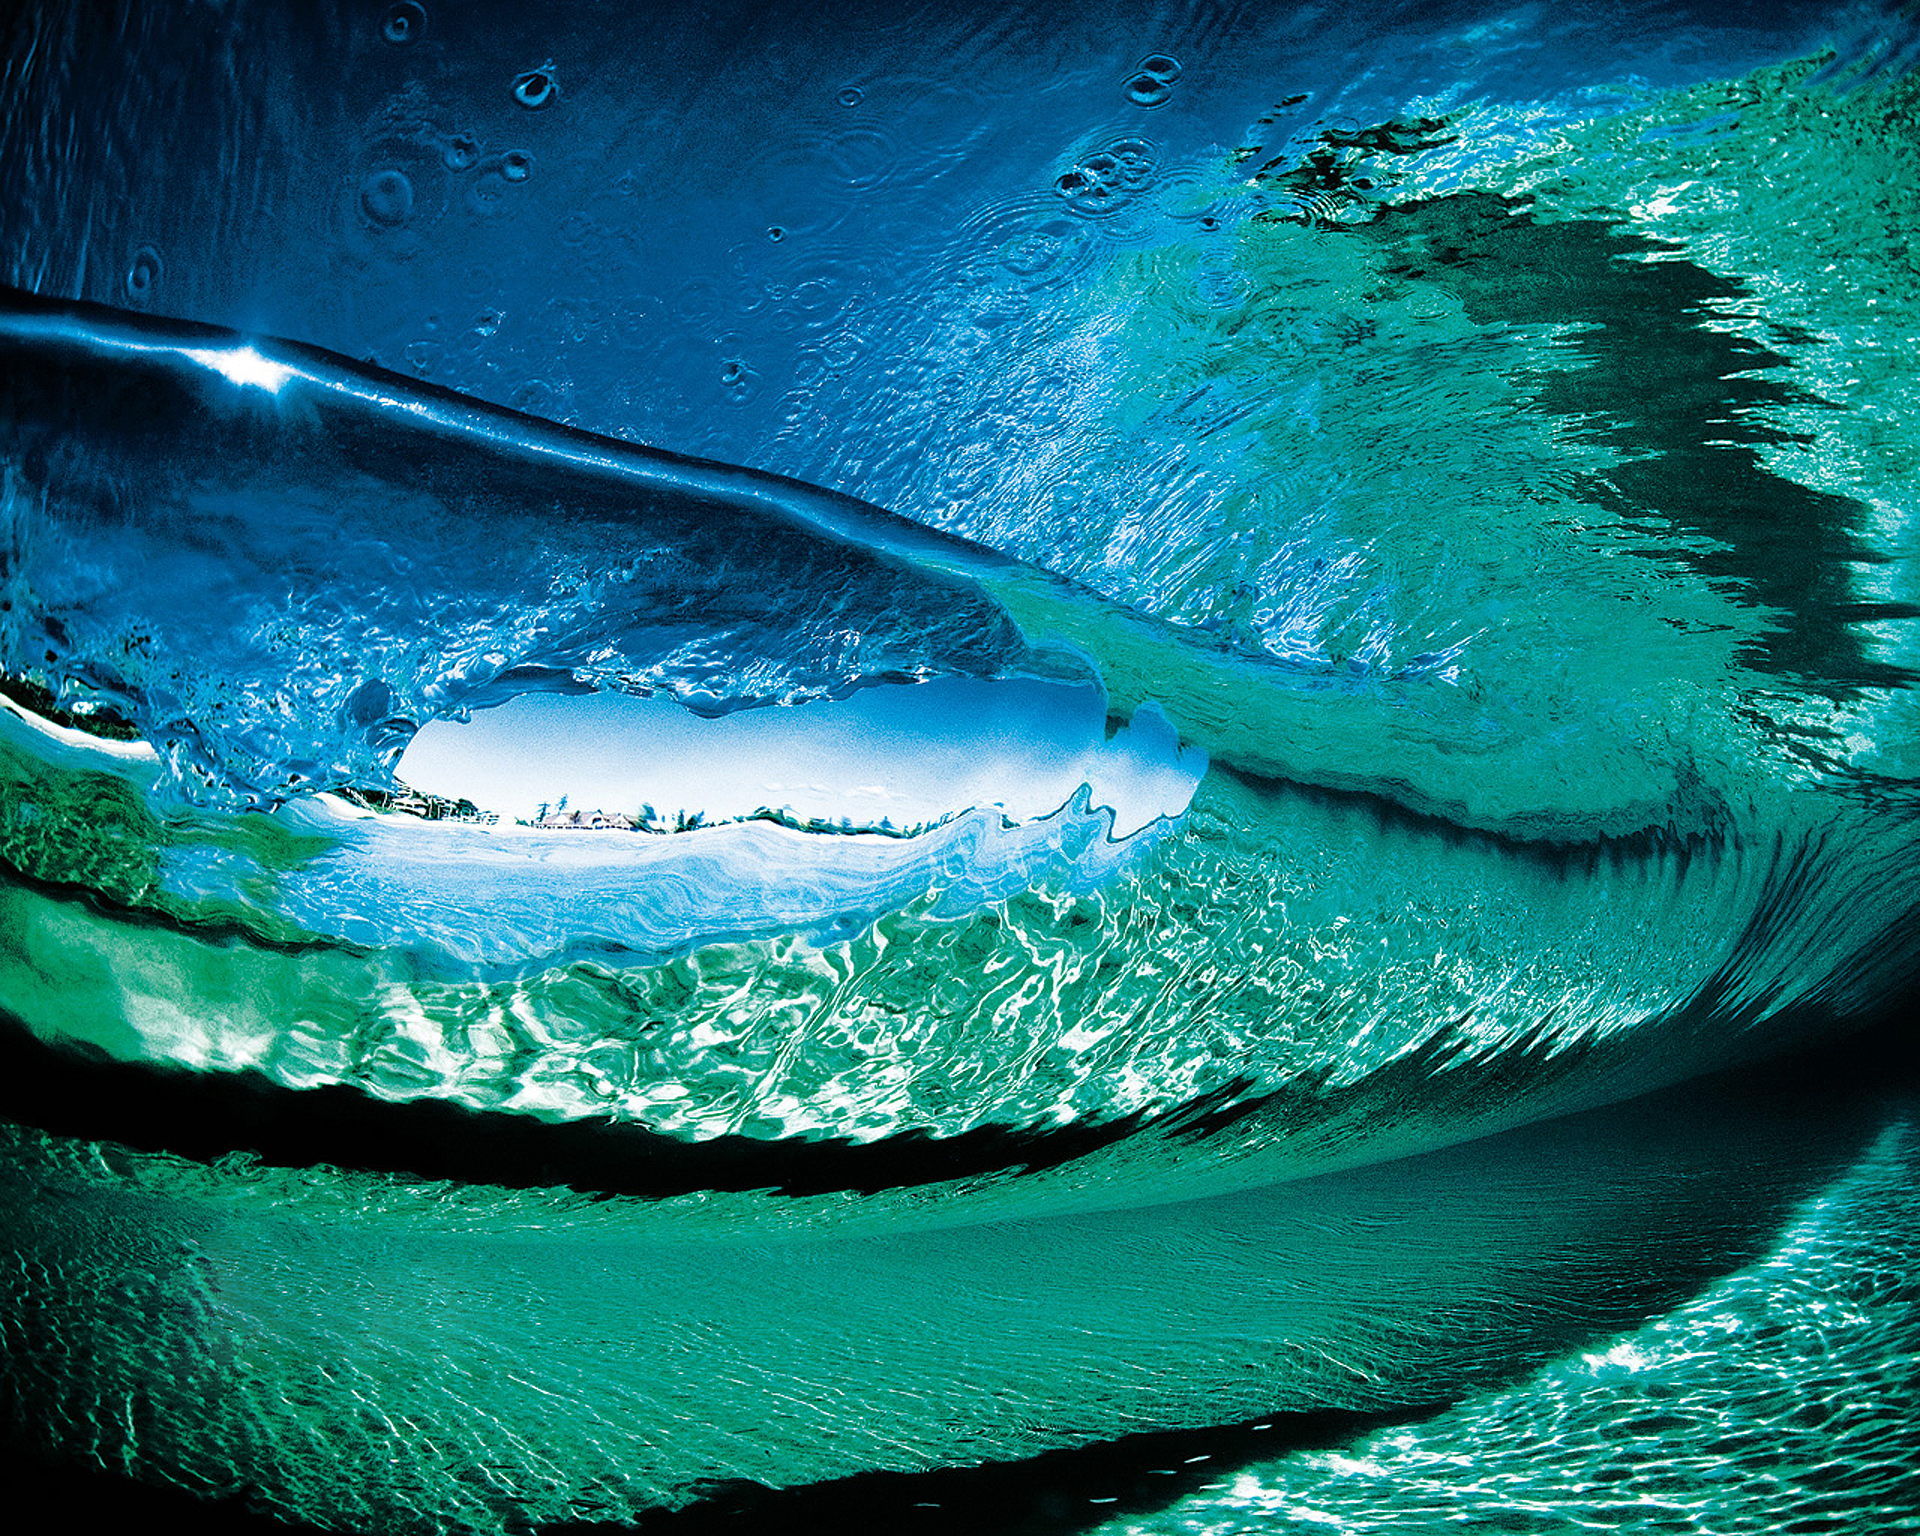 Nature's majestic power on display: an ocean wave crashing against the shore.